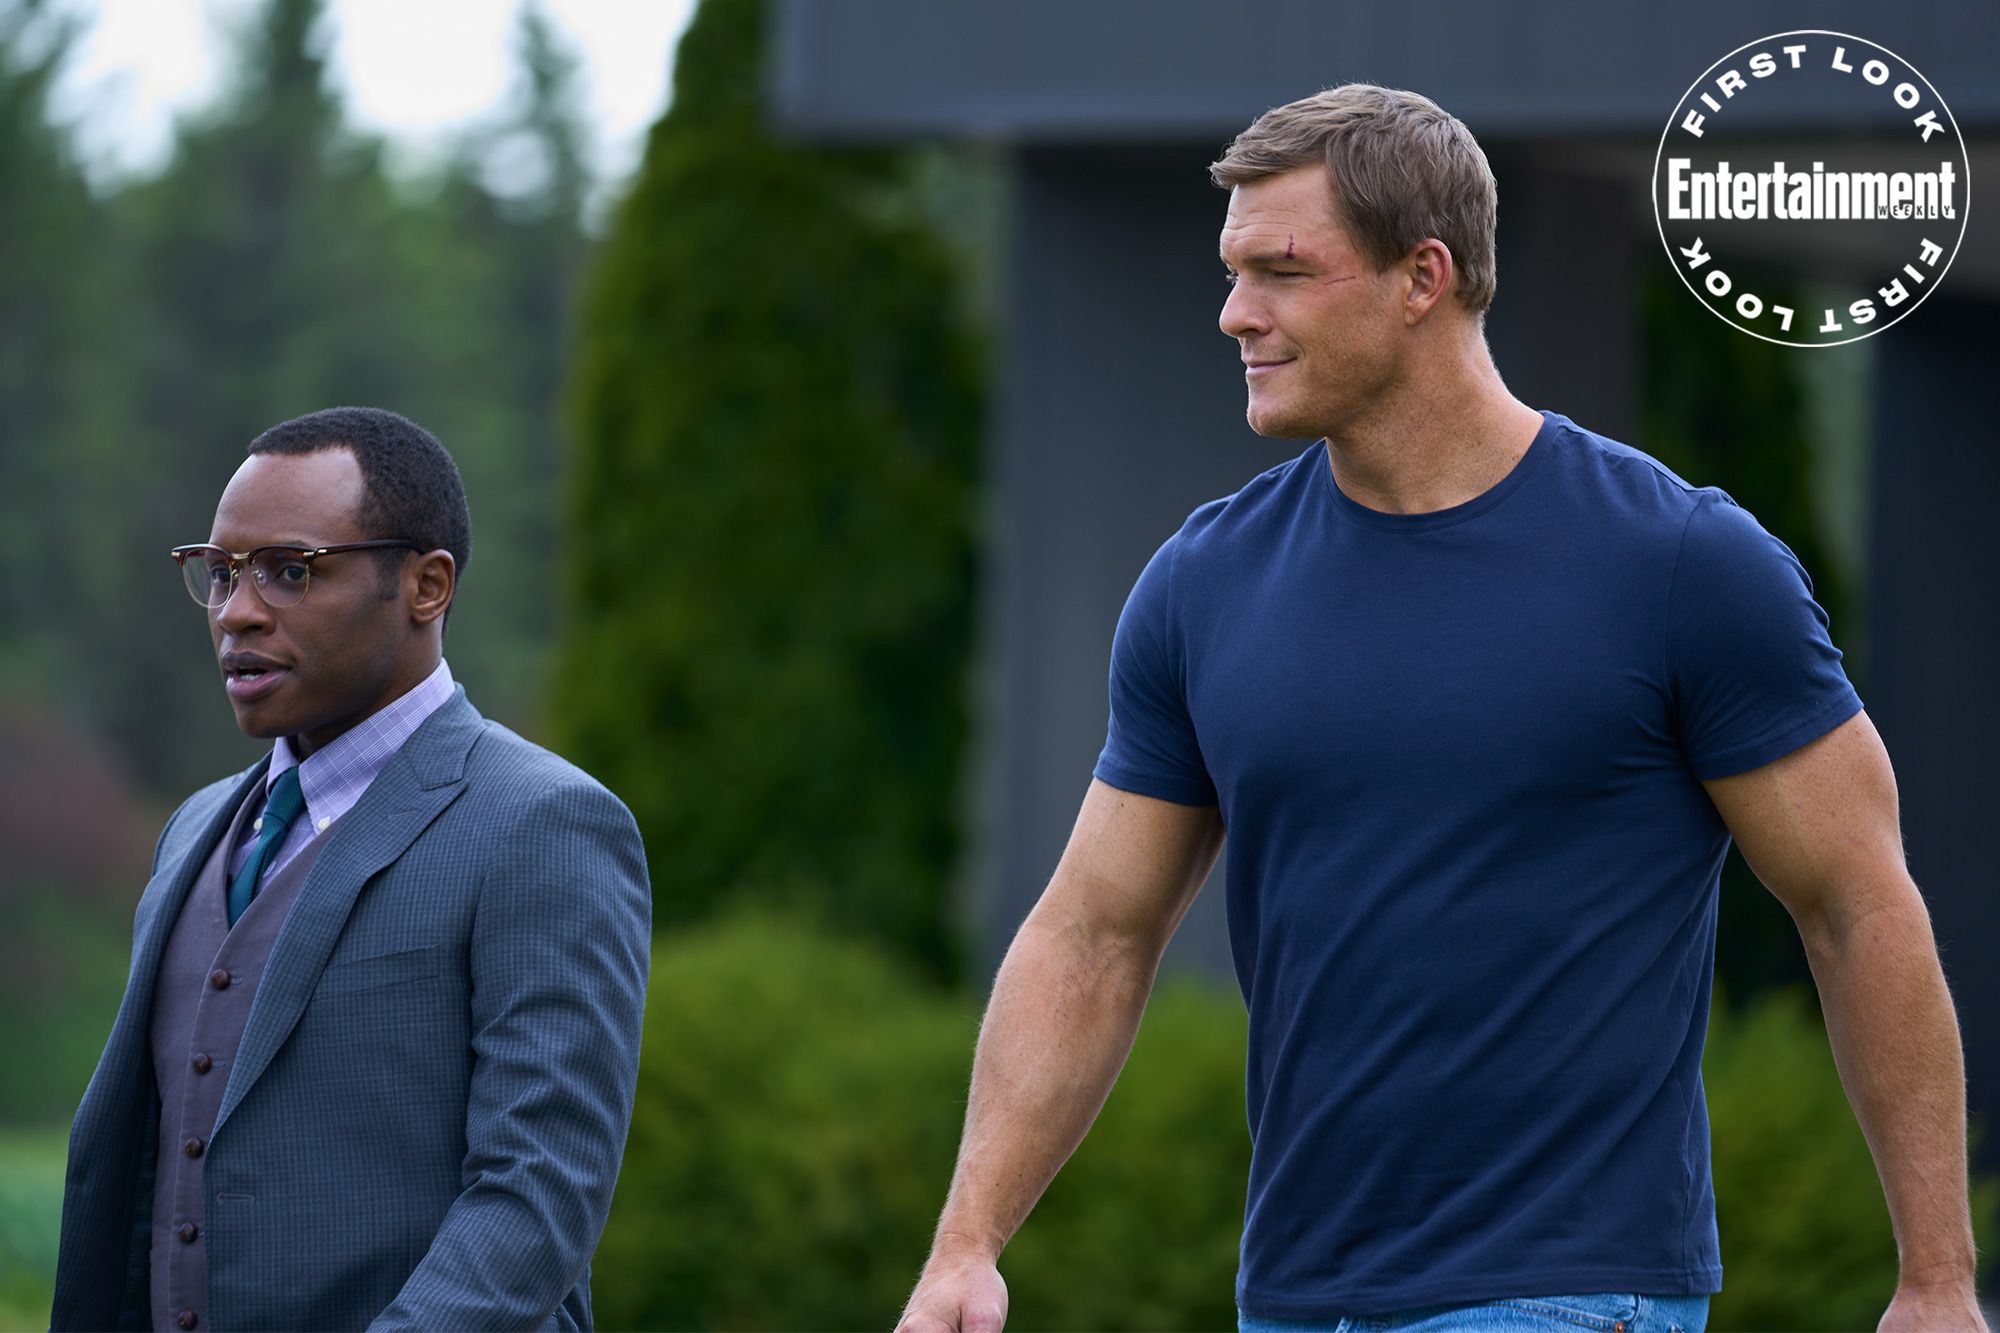 Malcolm Goodwin and Alan Ritchson in Reacher